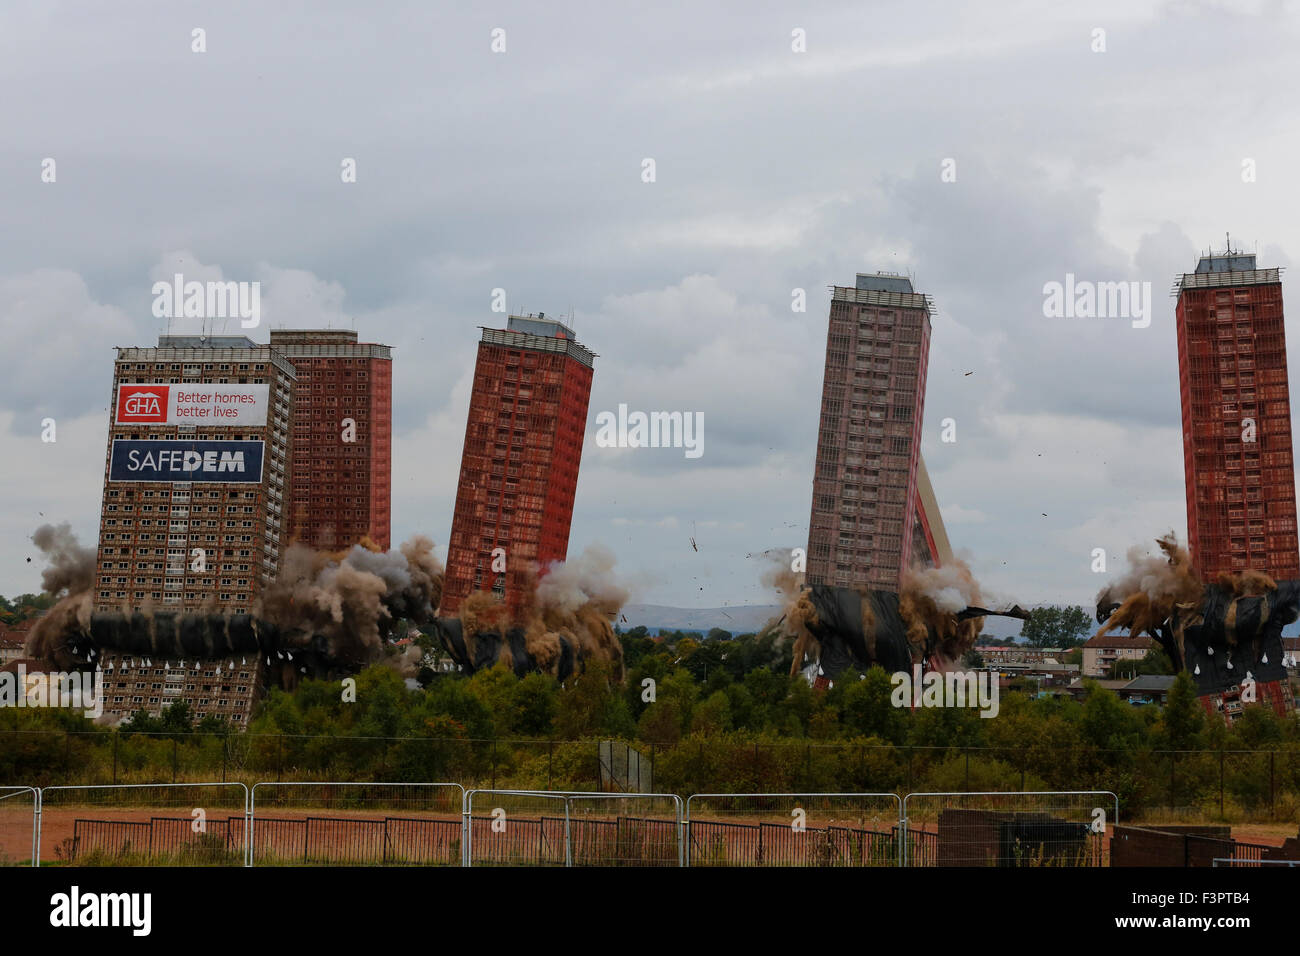 Glasgow, UK. 11th Oct, 2015. At 3.15pm on Sunday 11 October the Red Road Flats, Glasgow were brought down by controlled explosions. About 2500 local residents were  evacuated from the surrounding houses as a safety measure during the demolition. After the explosions it was obvious that only 4 of the housing blocks had fully collapsed and 2 remained partially demolished. It is planned to have the two towers demolished conventionally on Monday 12 October. It is estimated that over 10000 spectators watched the demolition. Credit:  Findlay/Alamy Live News Stock Photo